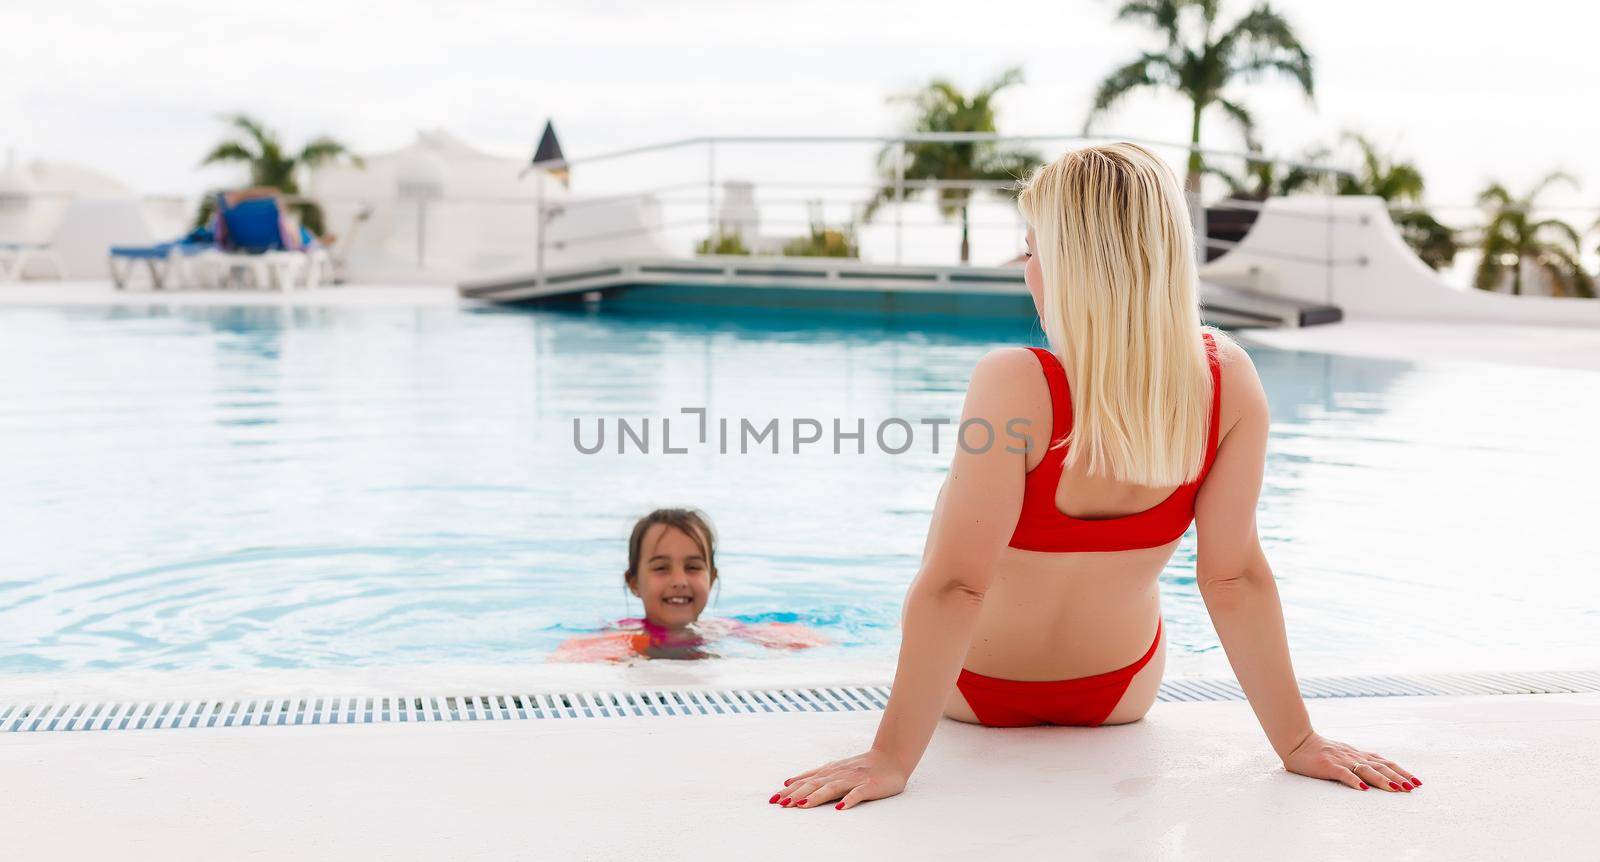 Woman enjoying vacation holidays at luxurious beachfront hotel resort with swimming pool and tropical lansdcape near the beach.